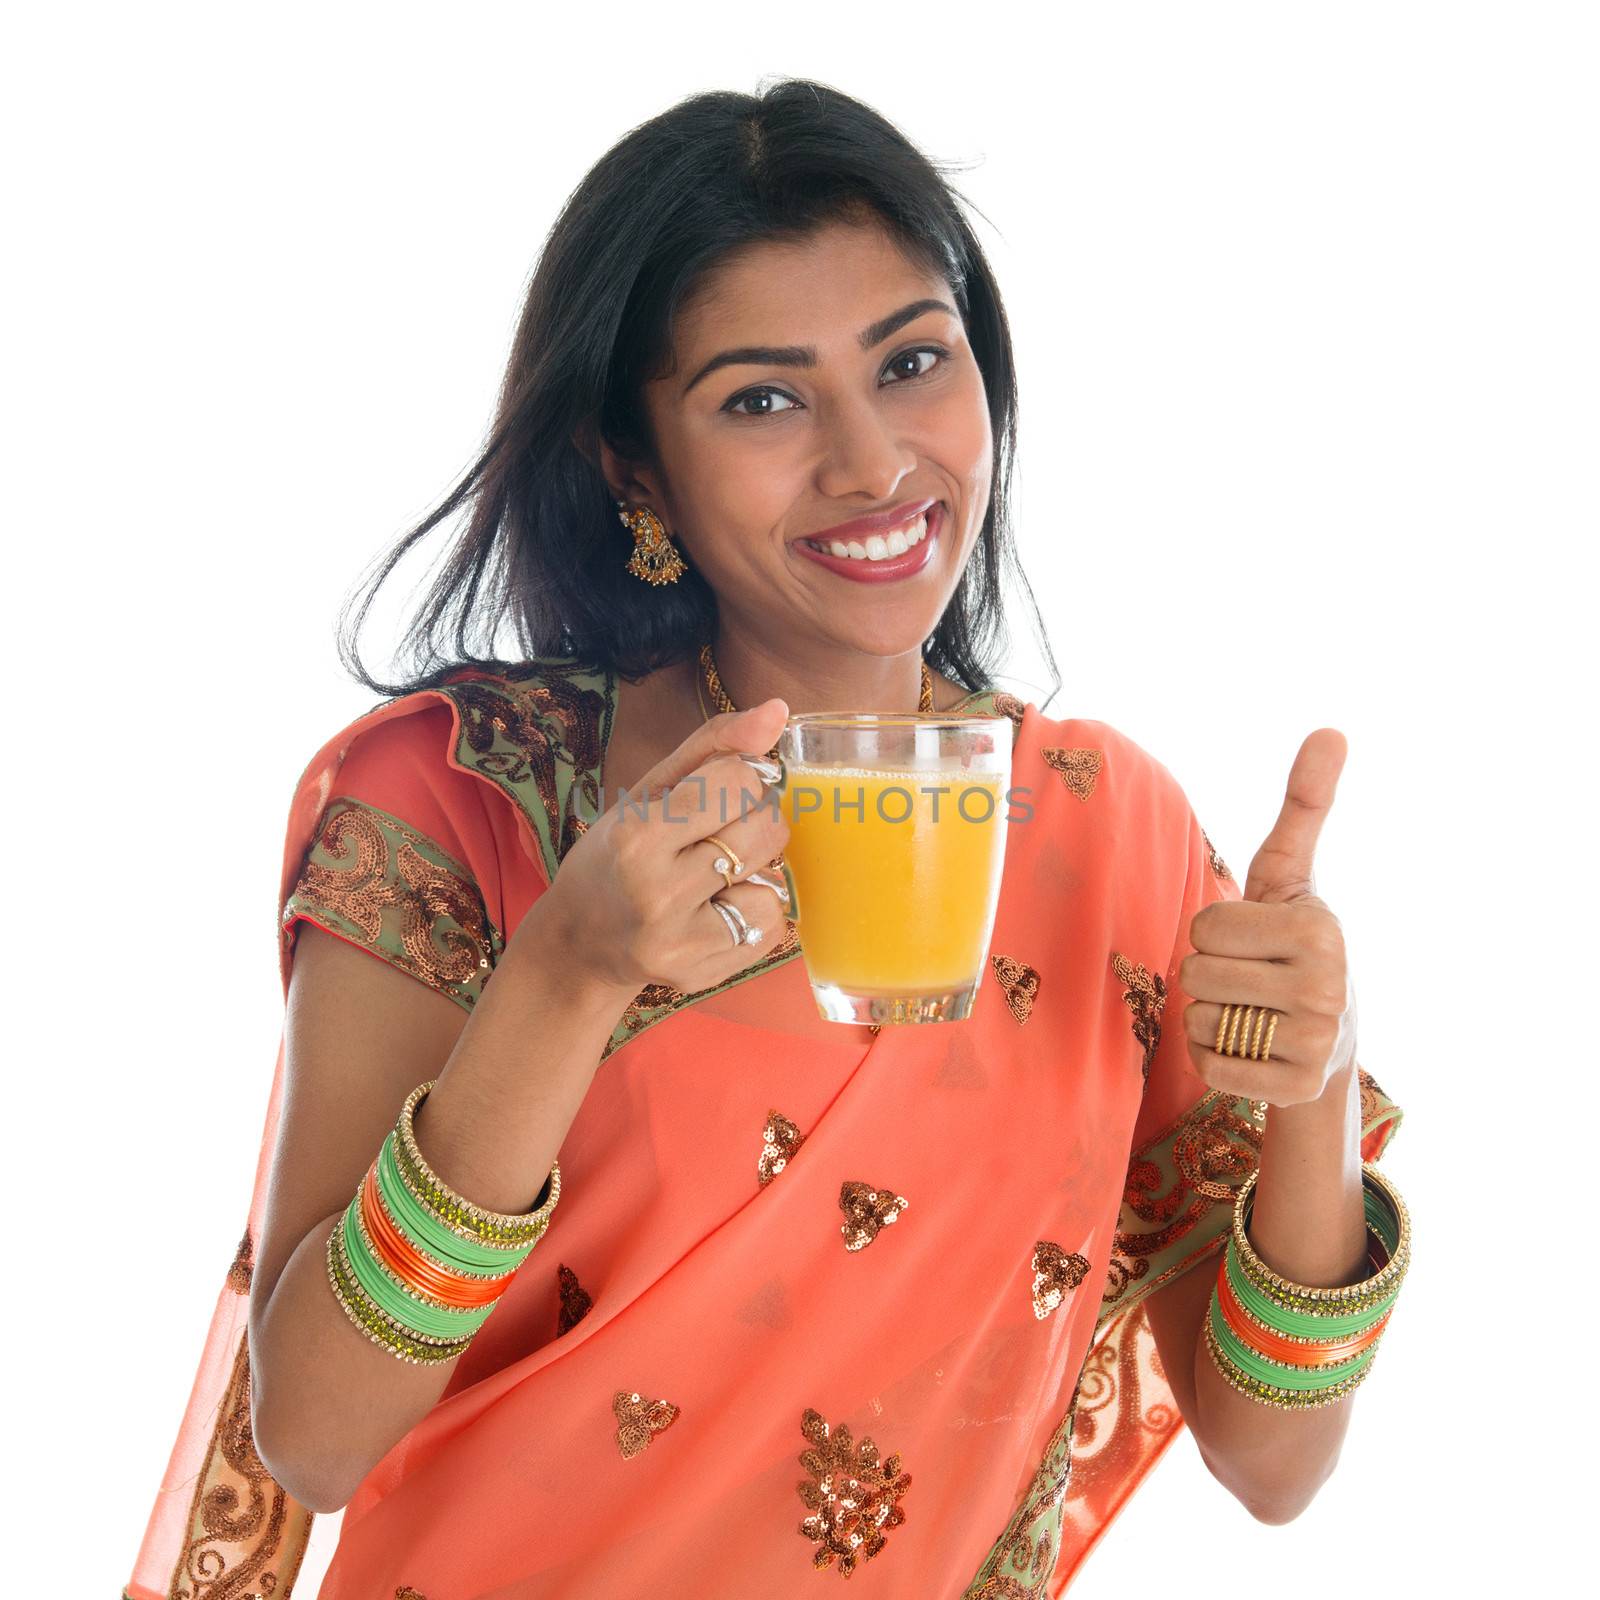 Happy traditional Indian woman in sari drinking a glass of orange juice showing thumb up, isolated on white background.